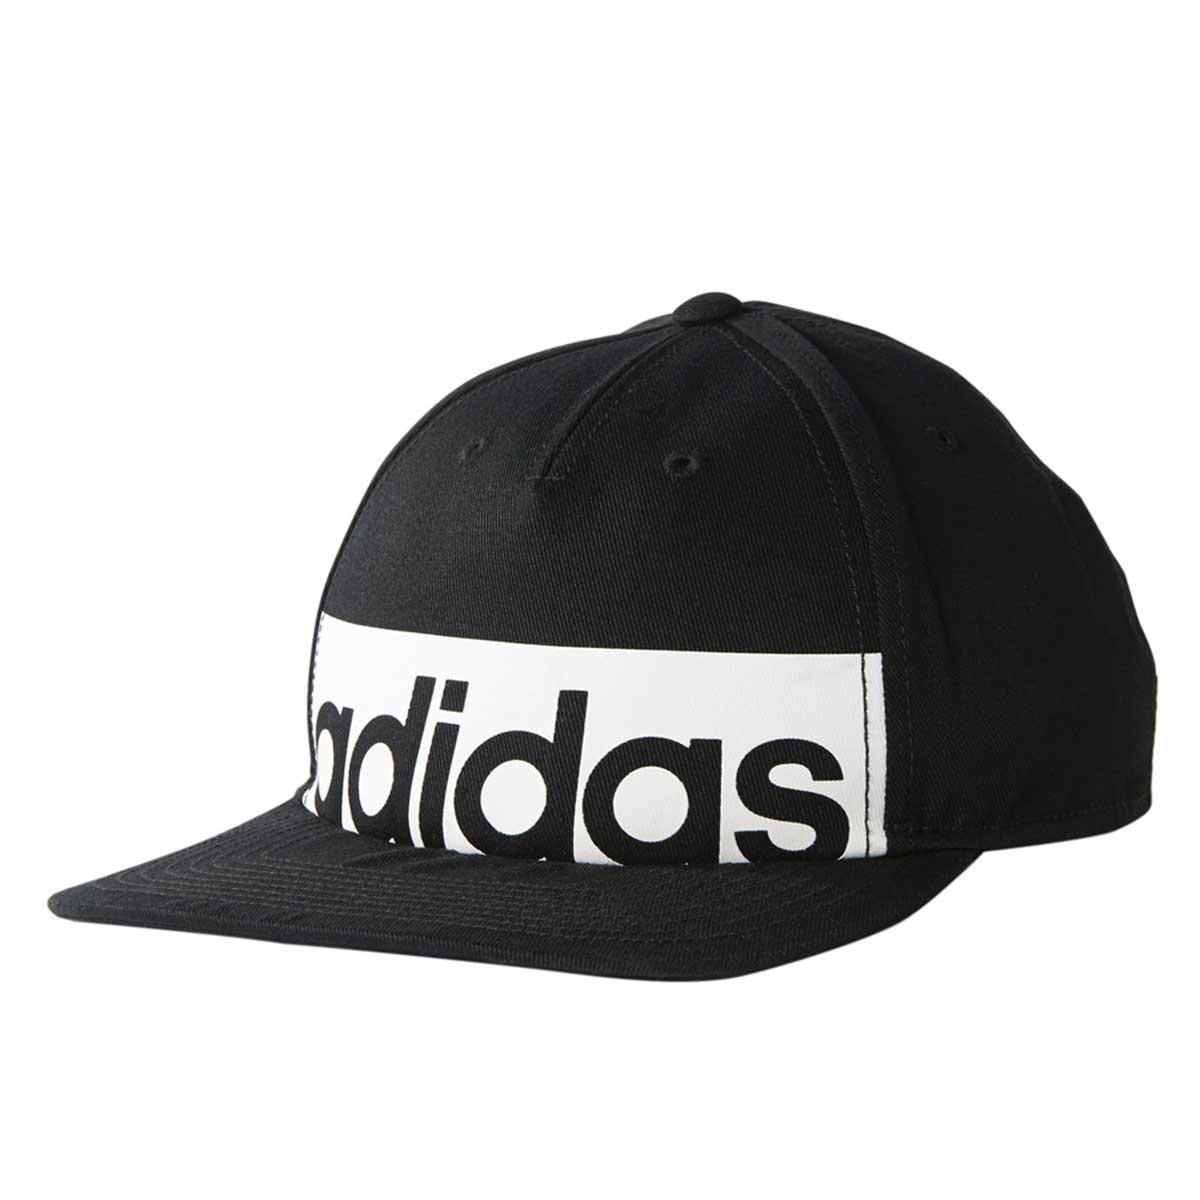 Buy Adidas Classic Panel Linear Cap Online at Lowest Price in India